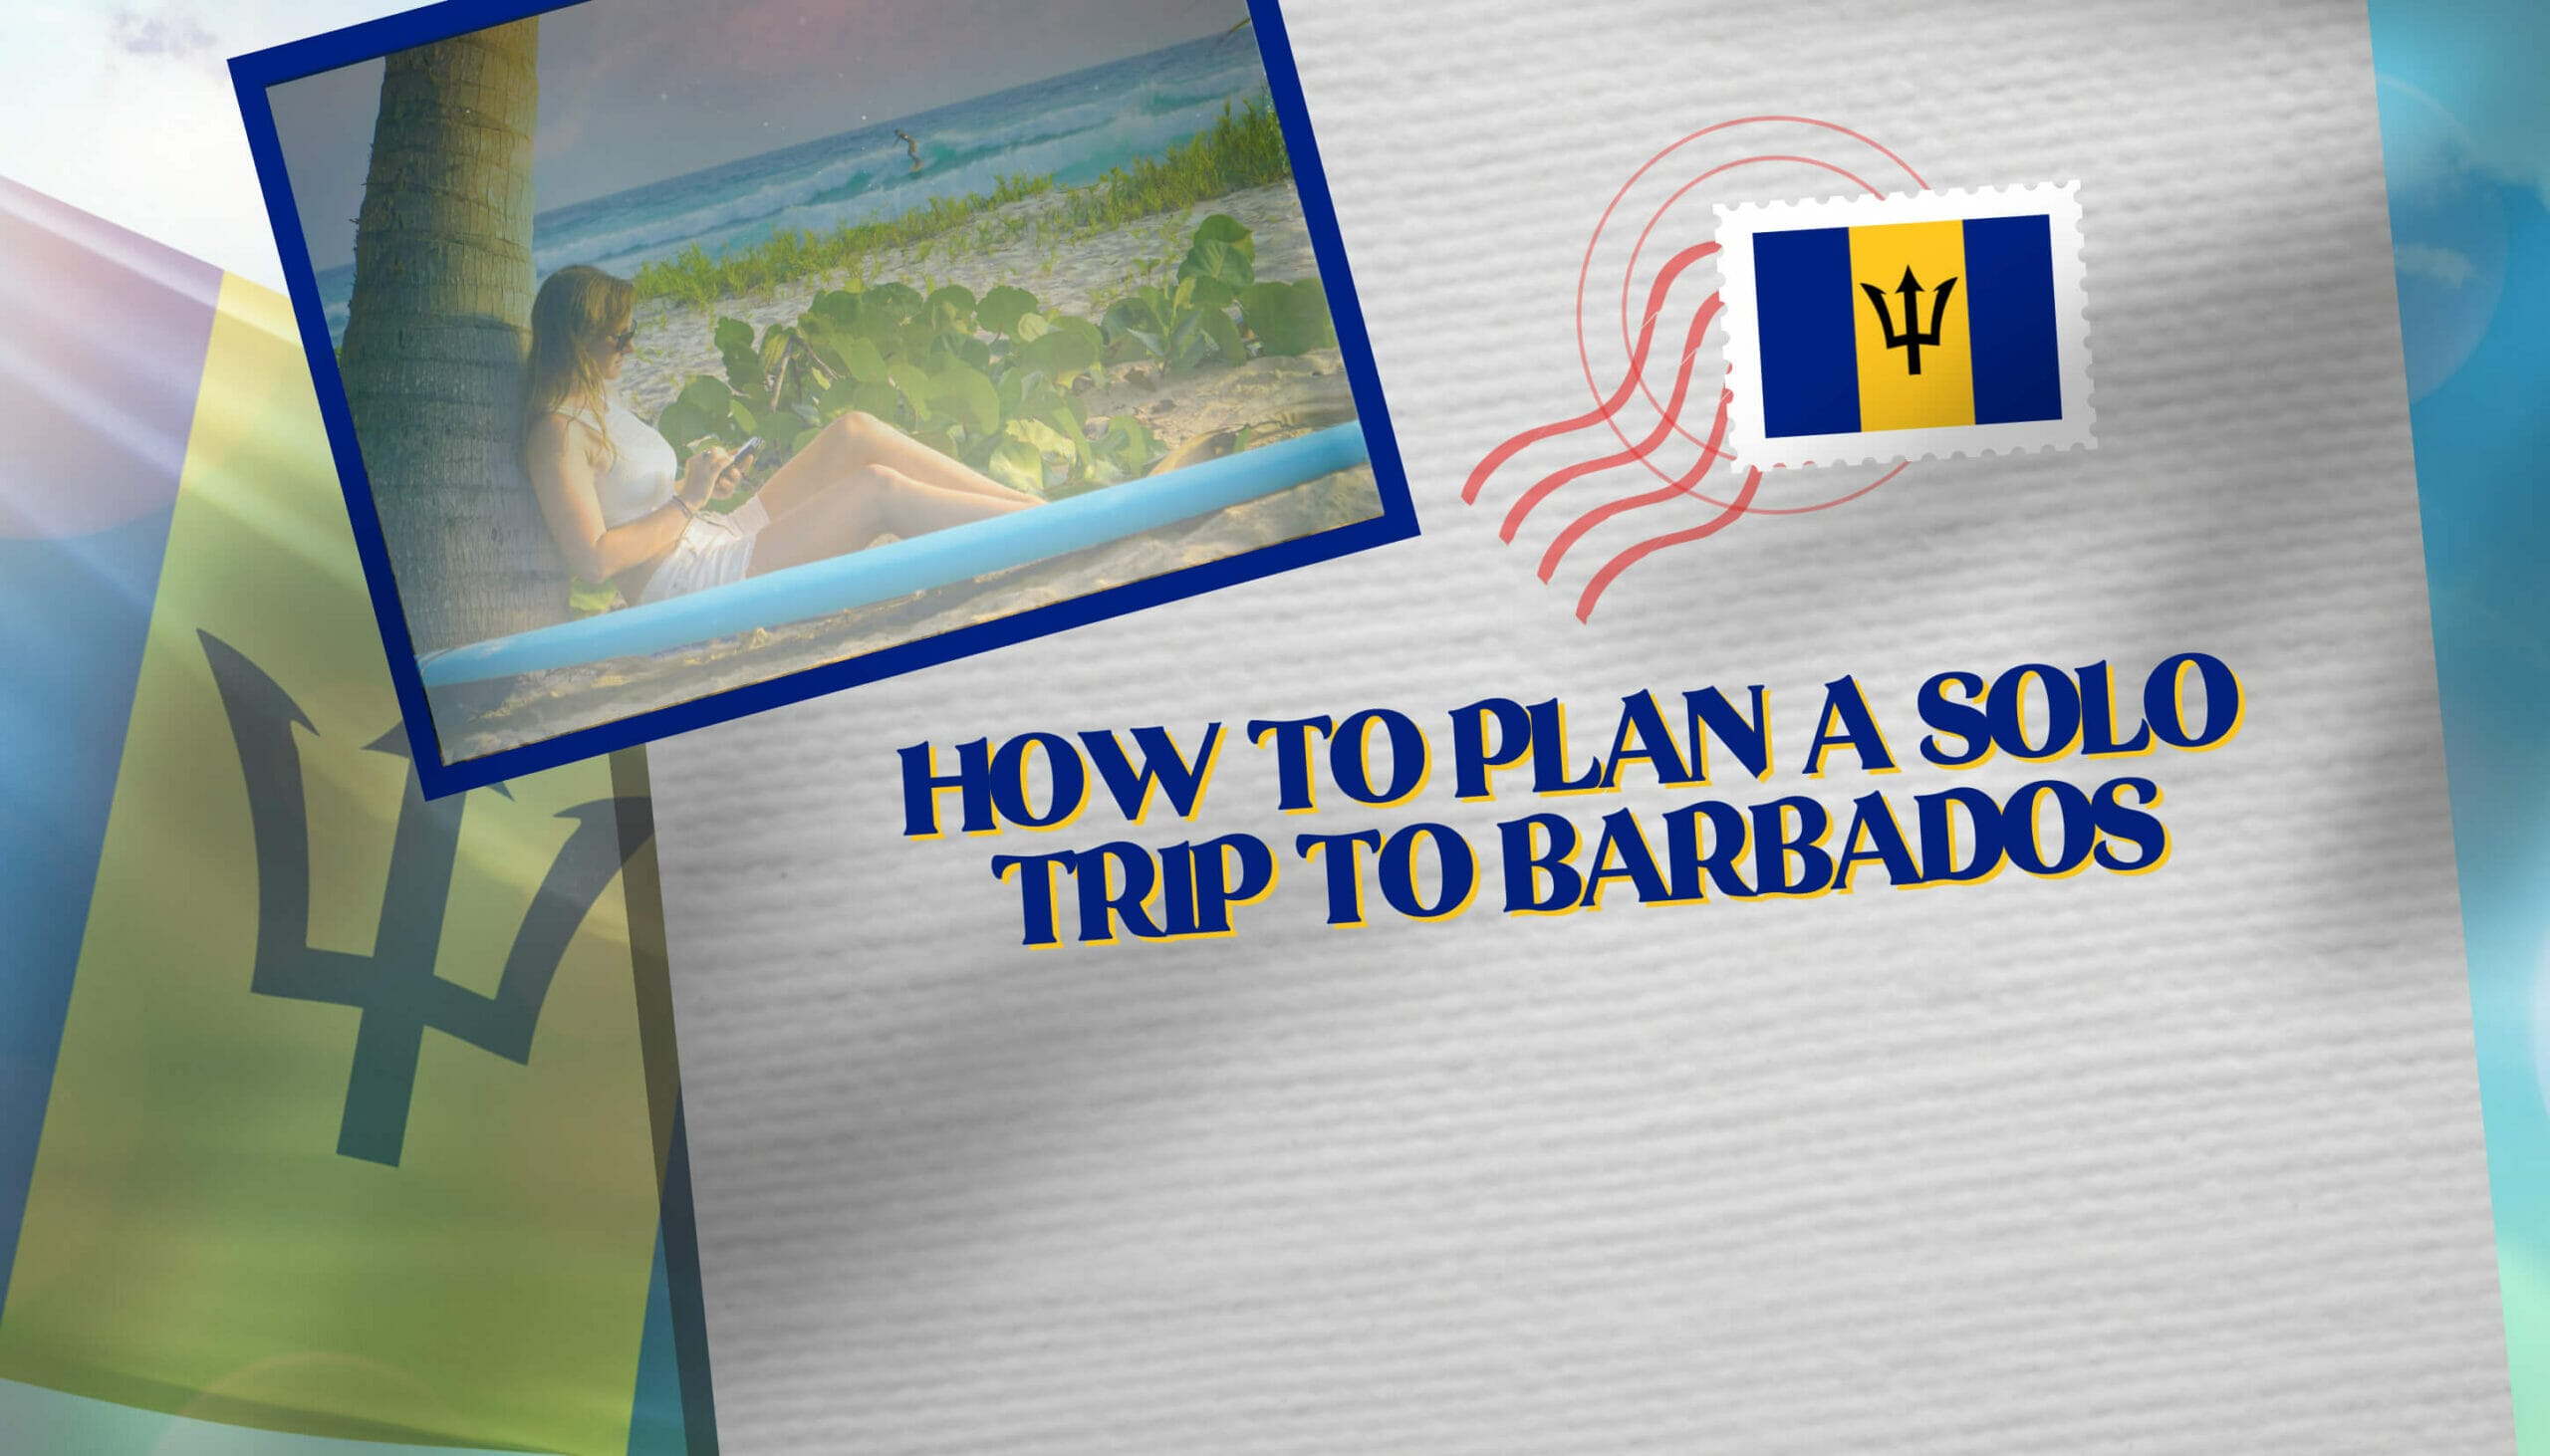 How to Plan a Solo Trip to Barbados